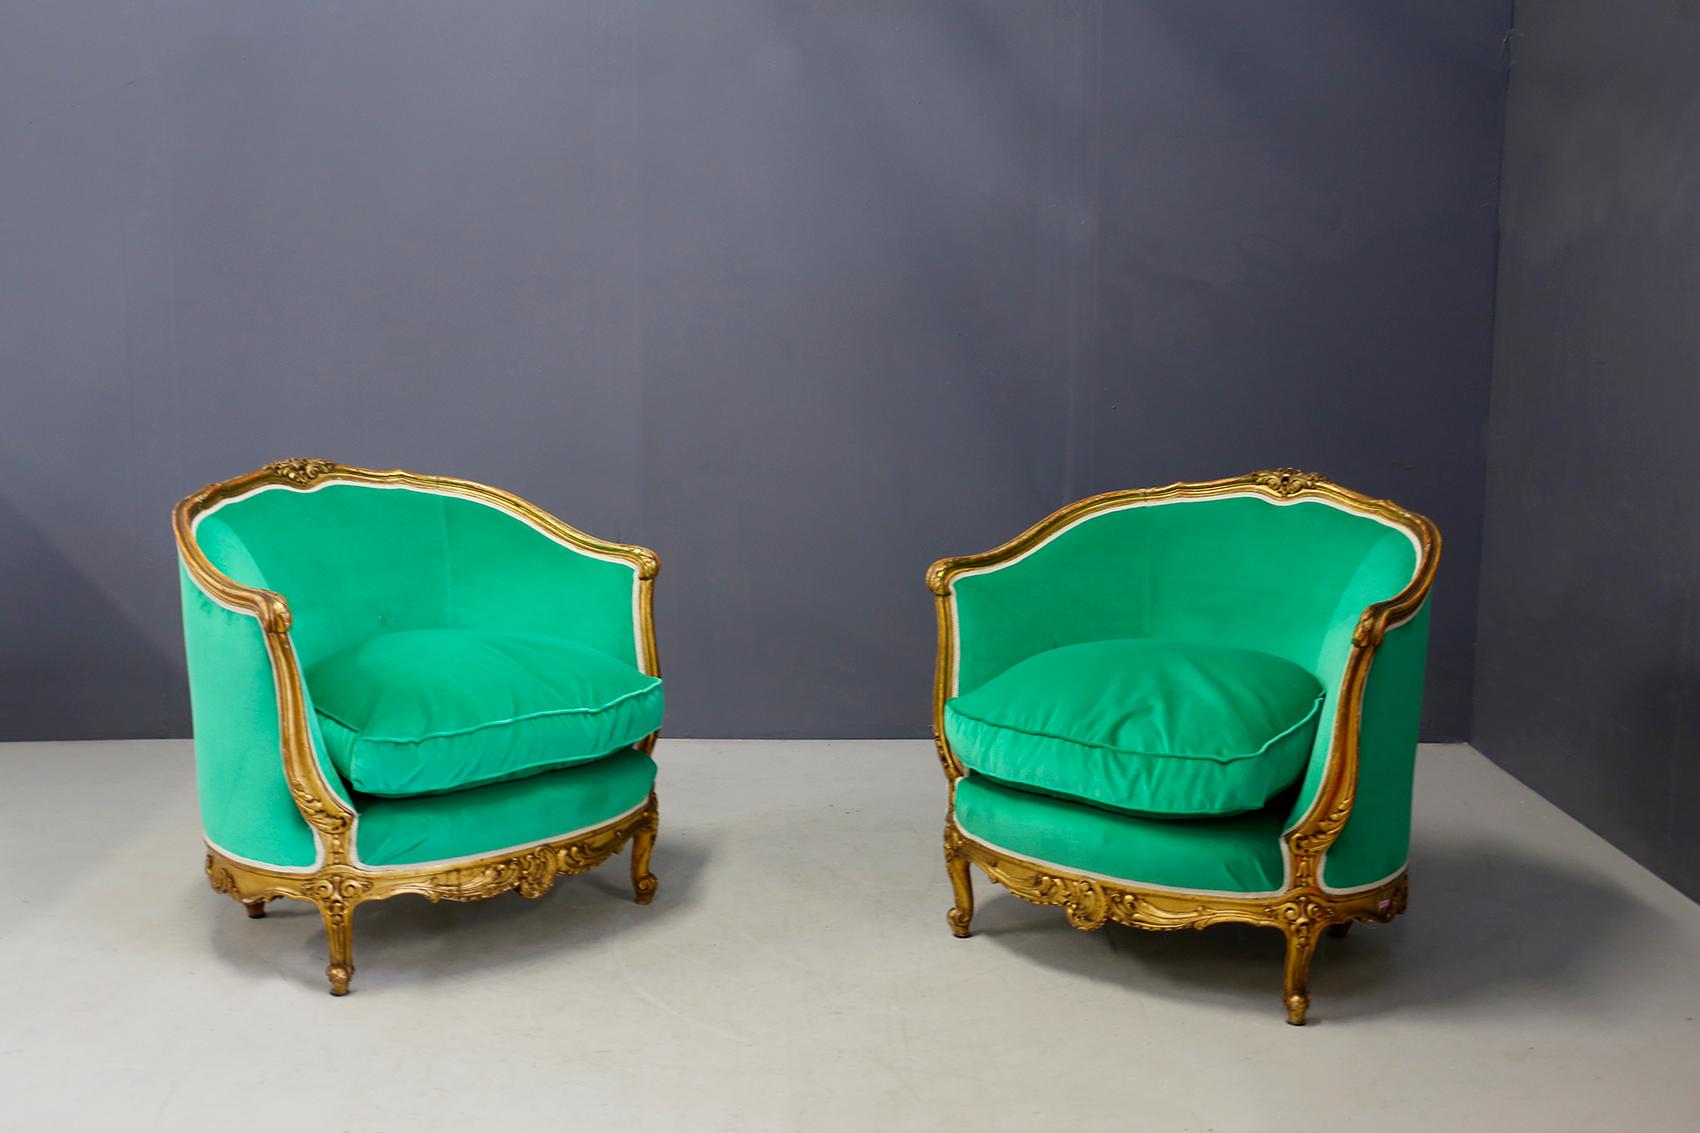 Elegant pair of armchairs of the end of the 19th century in carved gilded wood, in Louis XV style. The armchairs have been upholstered in a beautiful green velvet. 
The wood of the armchairs have been expertly inlaid and gilded. Given their age we